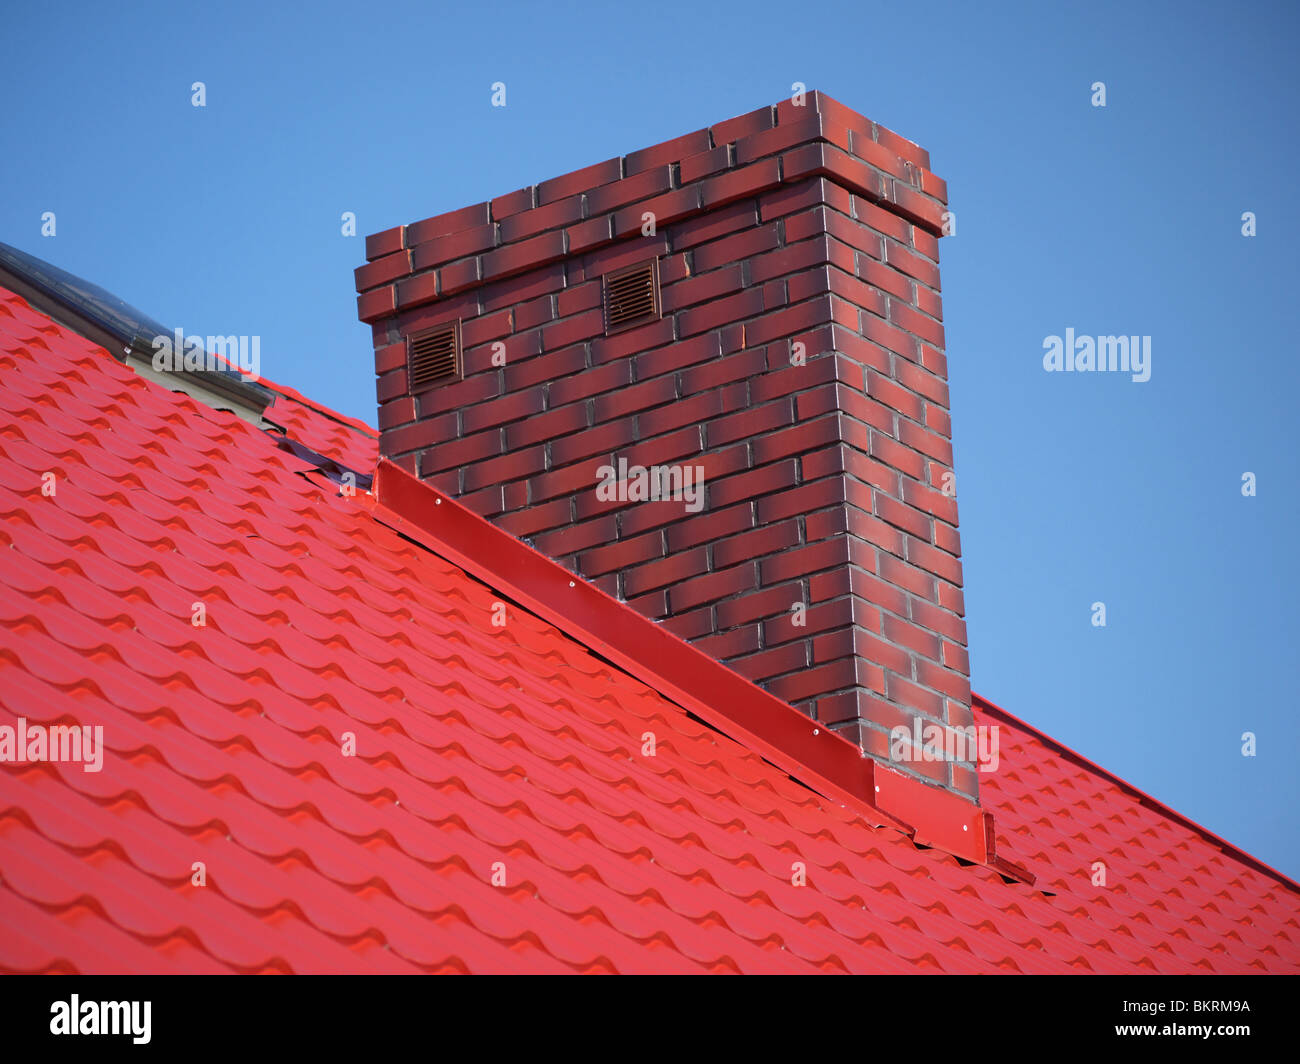 Closeup of red roof metal covering with brick chimney Stock Photo